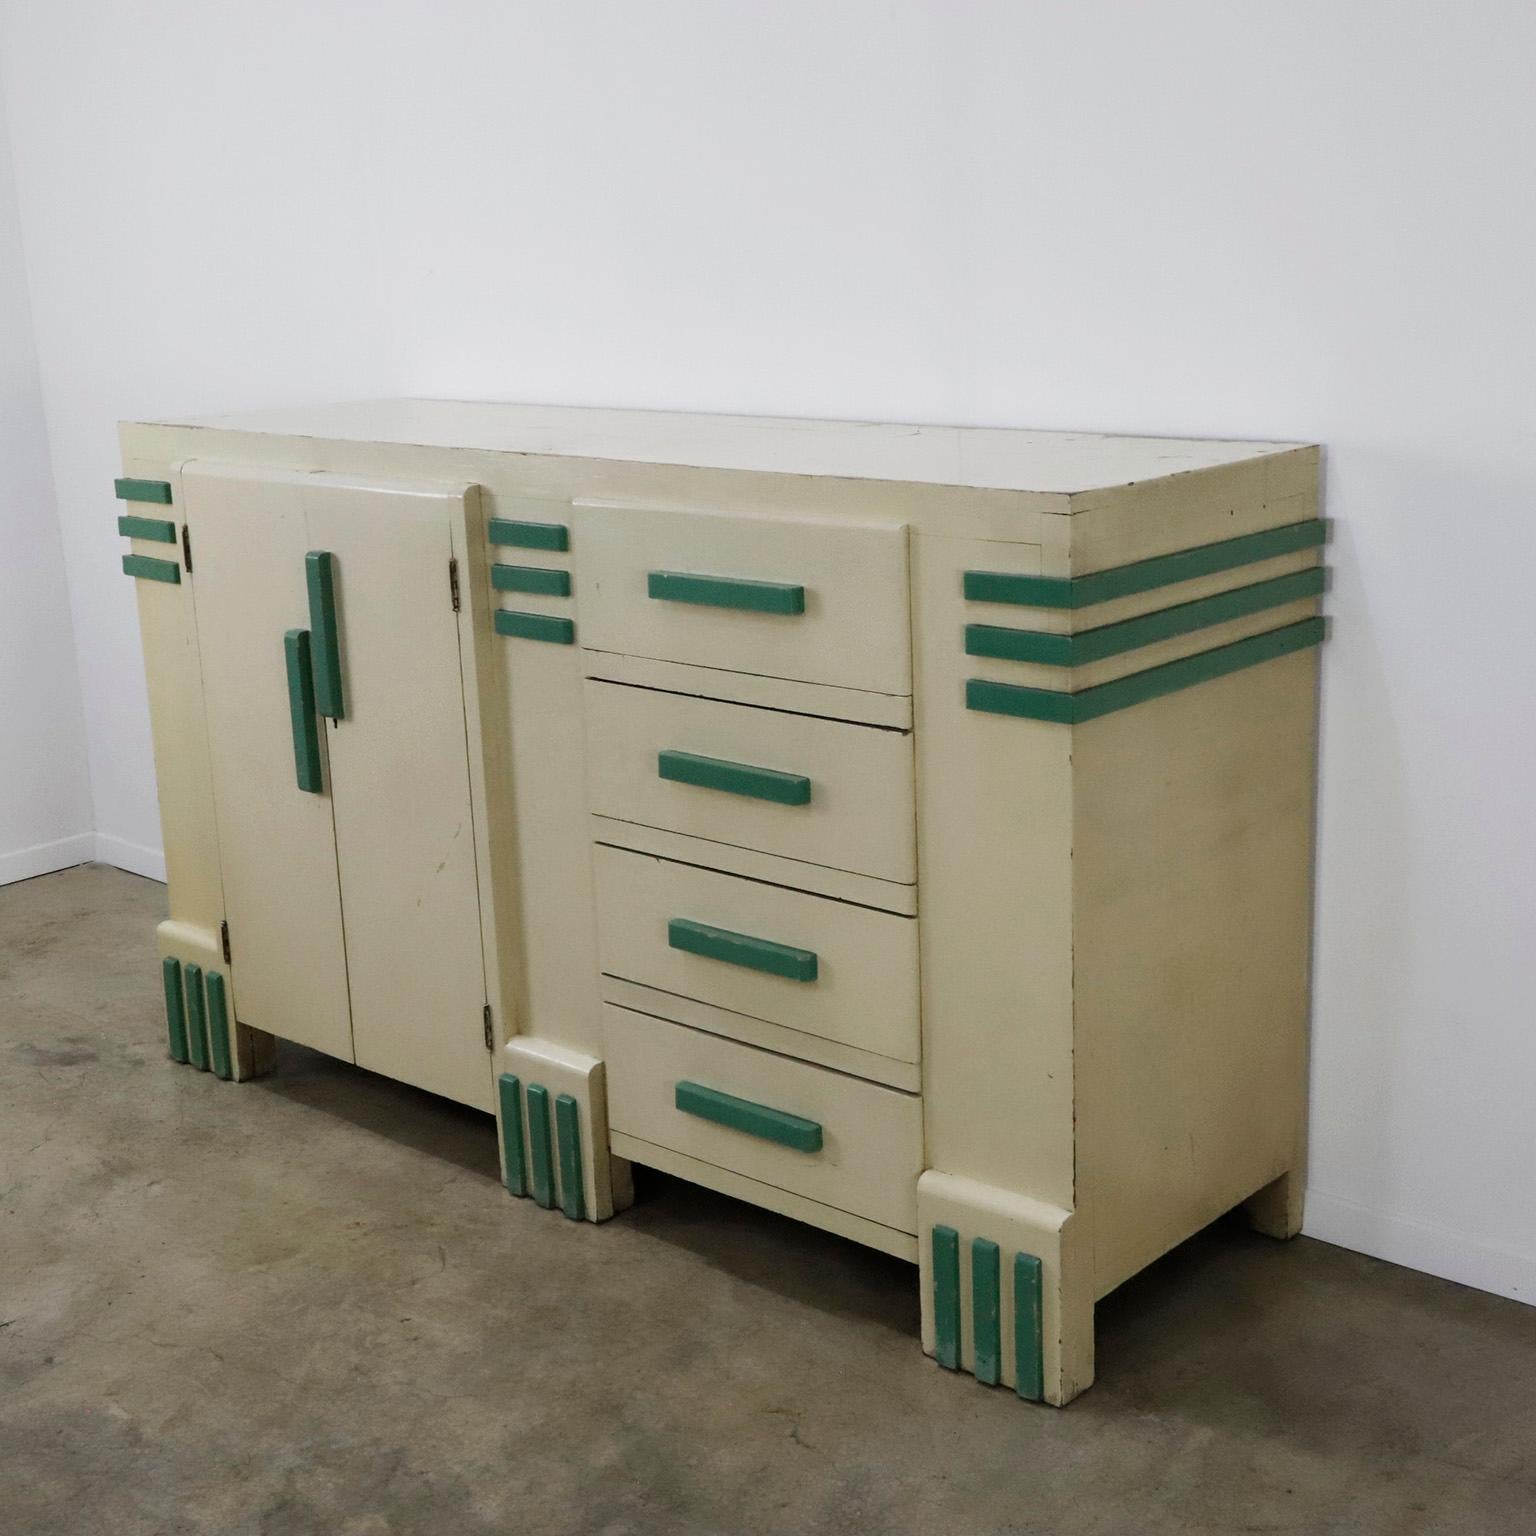 Circa 1930, We offer this Original Mexican Art Deco Credenza. Made in solid pine wood. This piece represents the pure Mexican art deco of the 30's. 